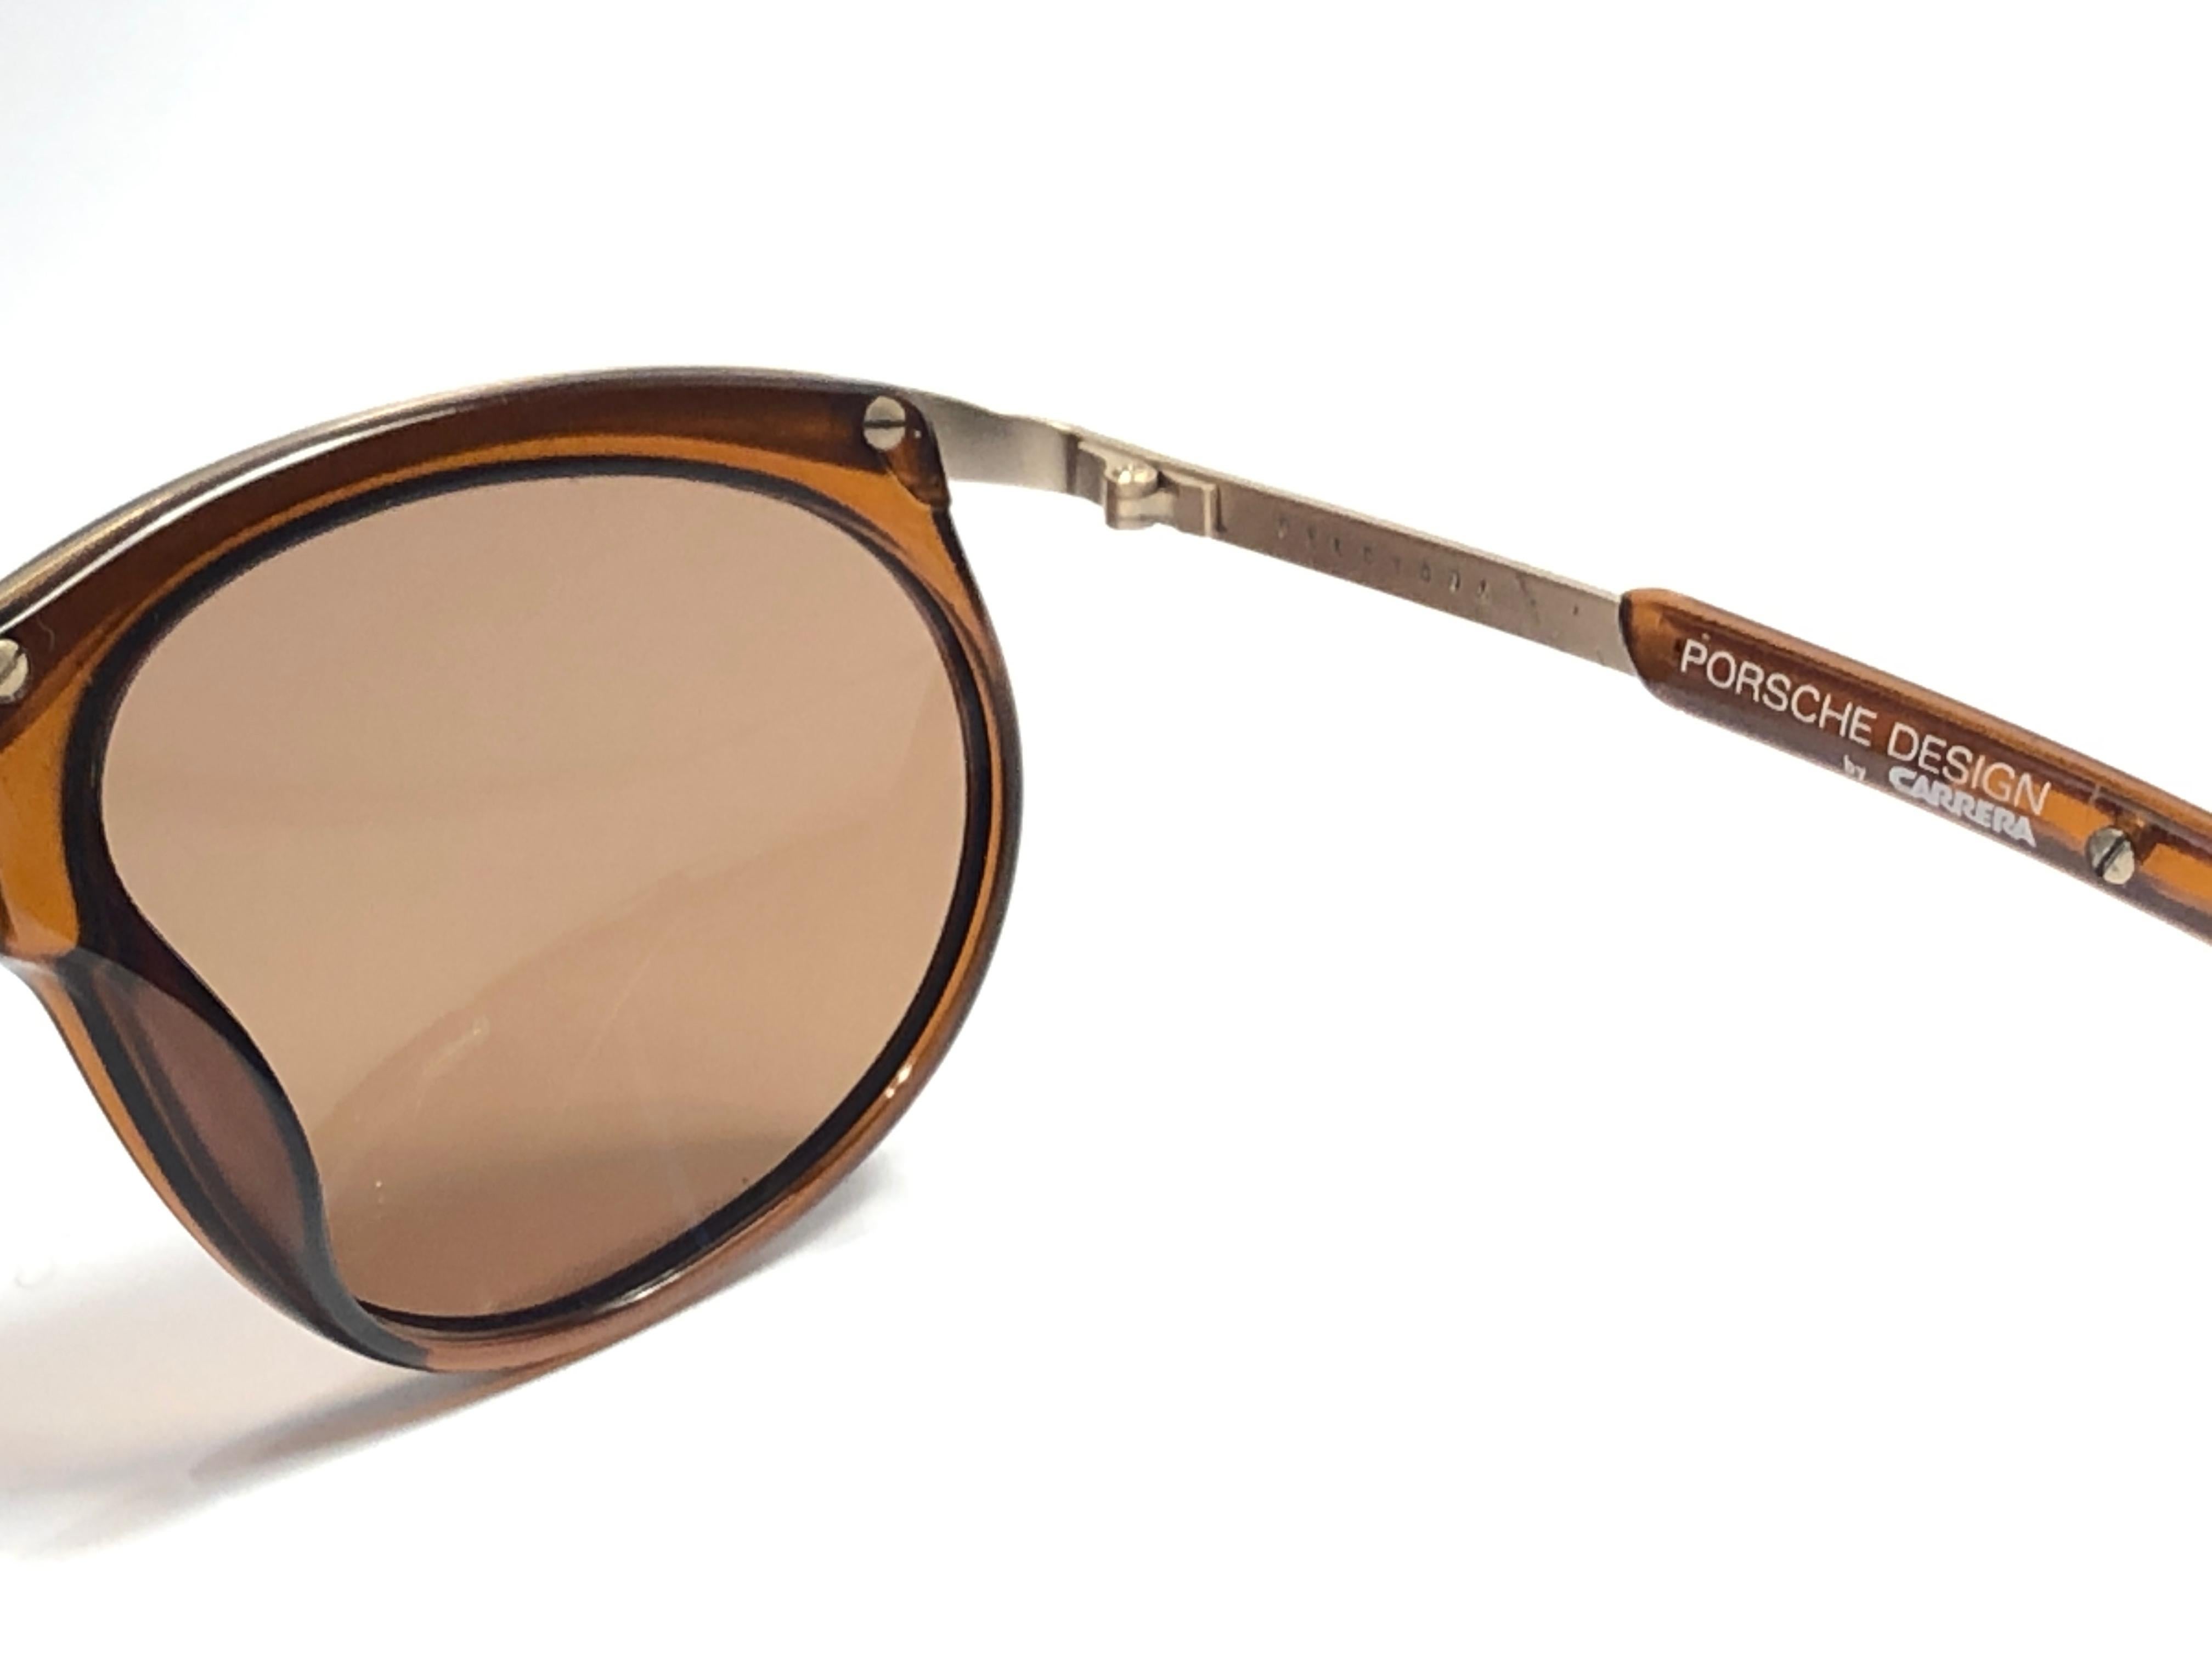 New Vintage Porsche Design By Carrera 5660 Amber and Gold Sunglasses In Excellent Condition For Sale In Baleares, Baleares